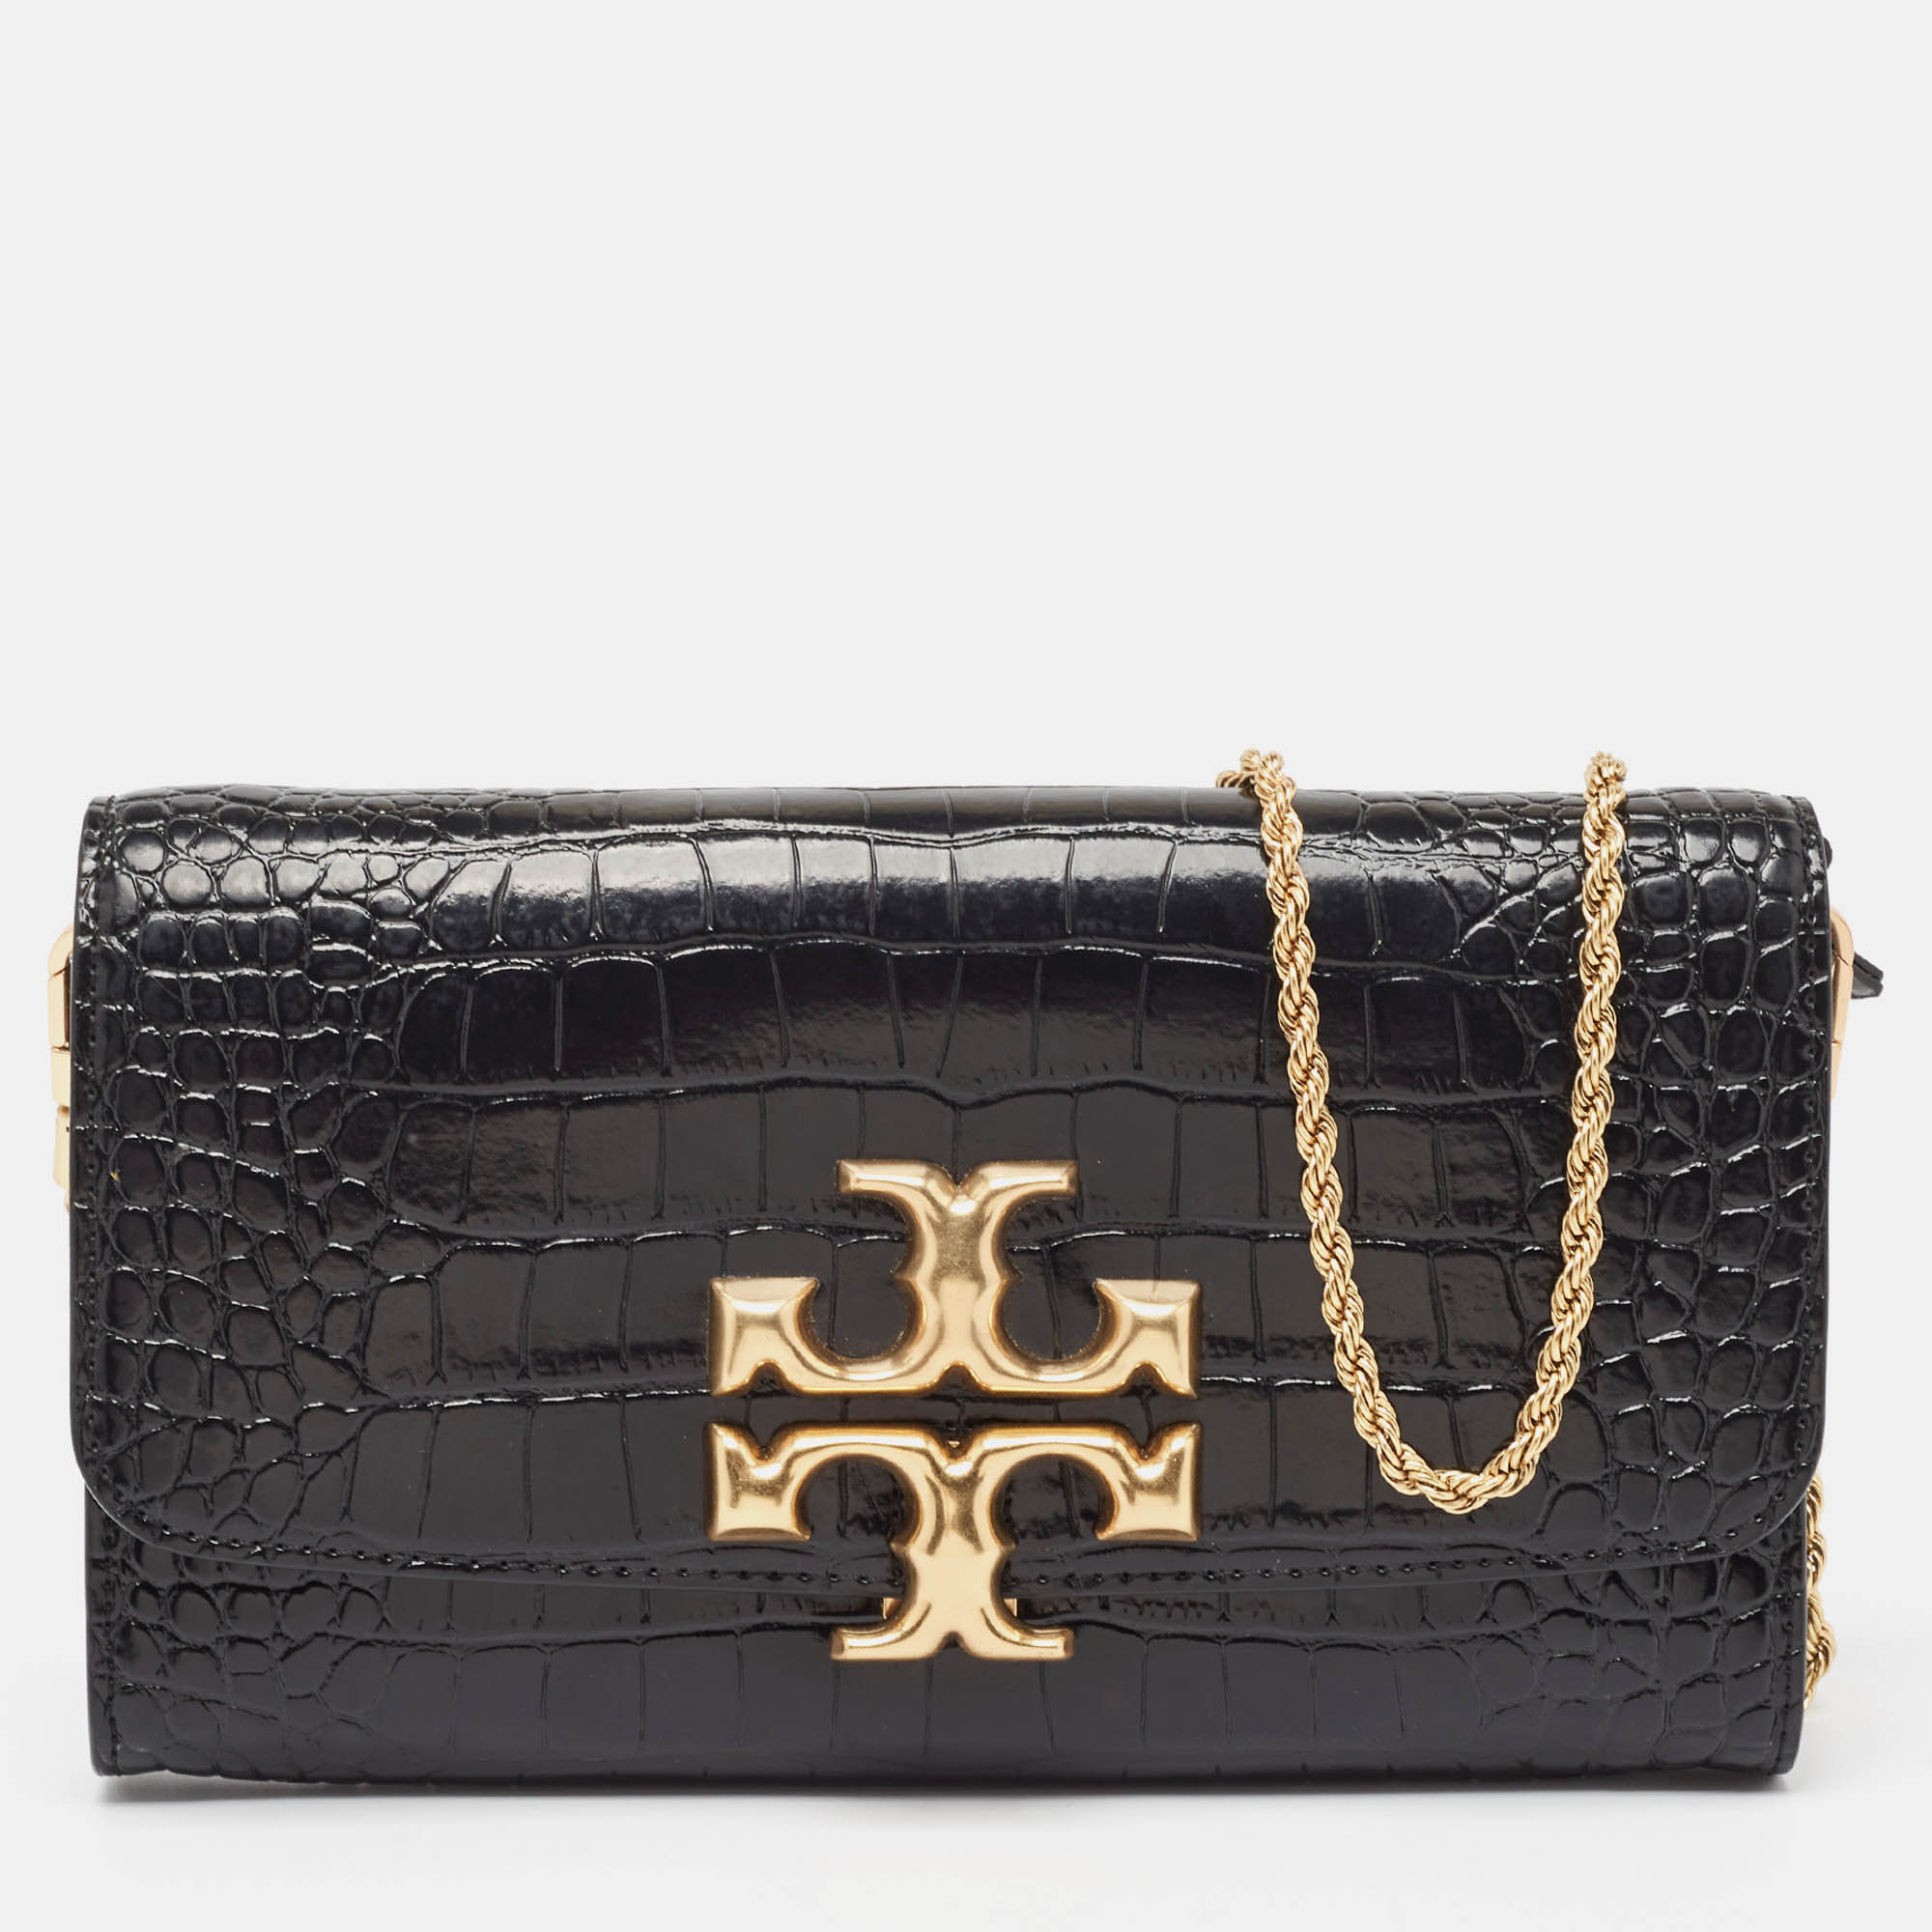 Tory burch croc embossed leather eleanor chain clutch